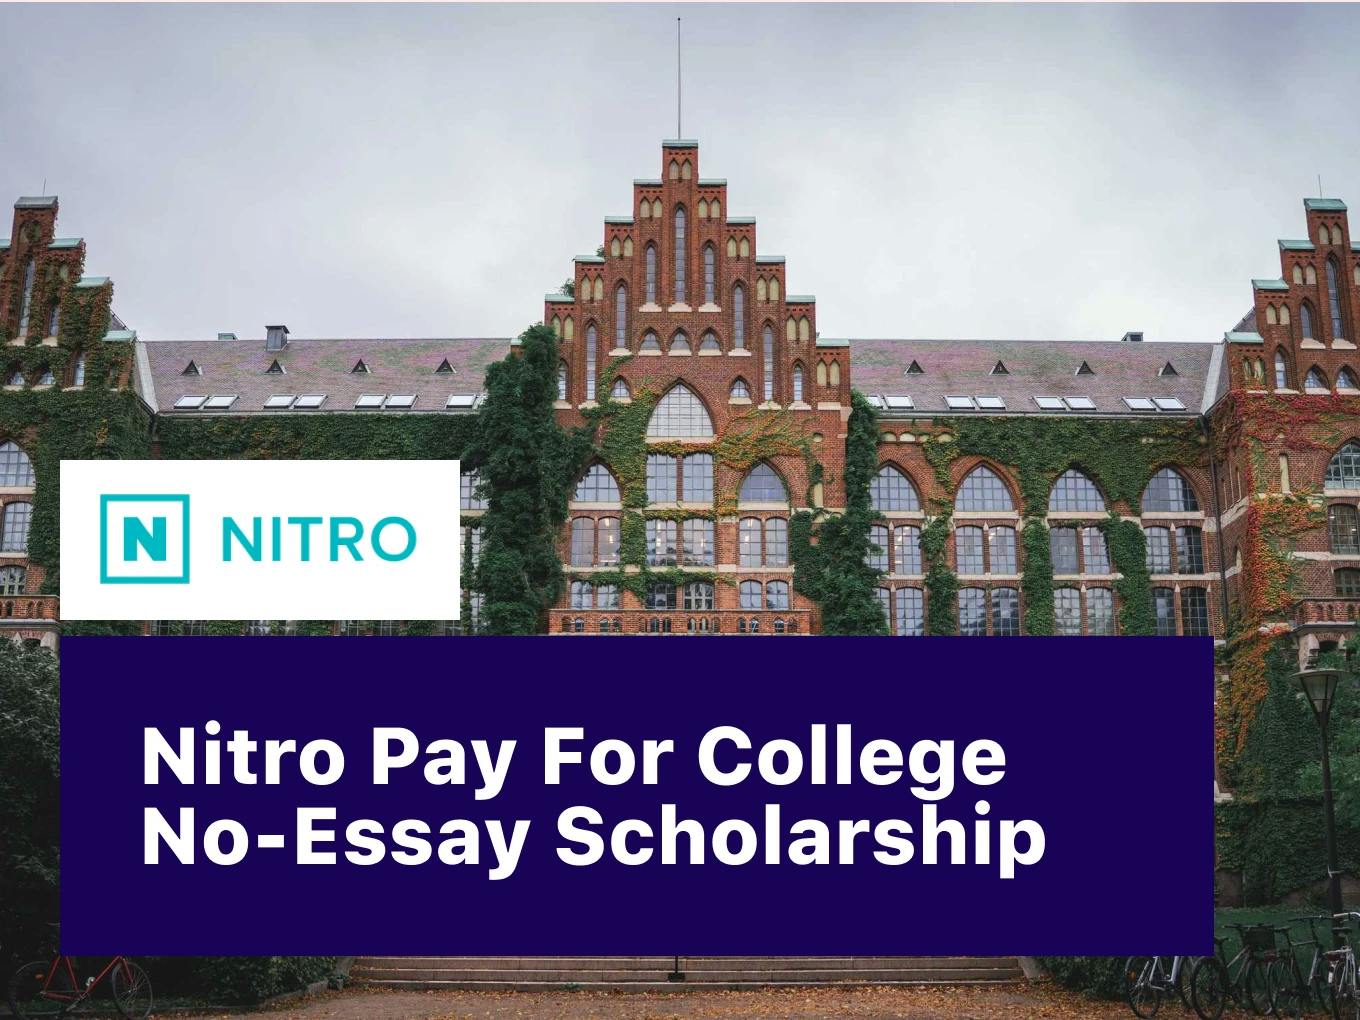 Nitro Pay For College No-Essay Scholarship